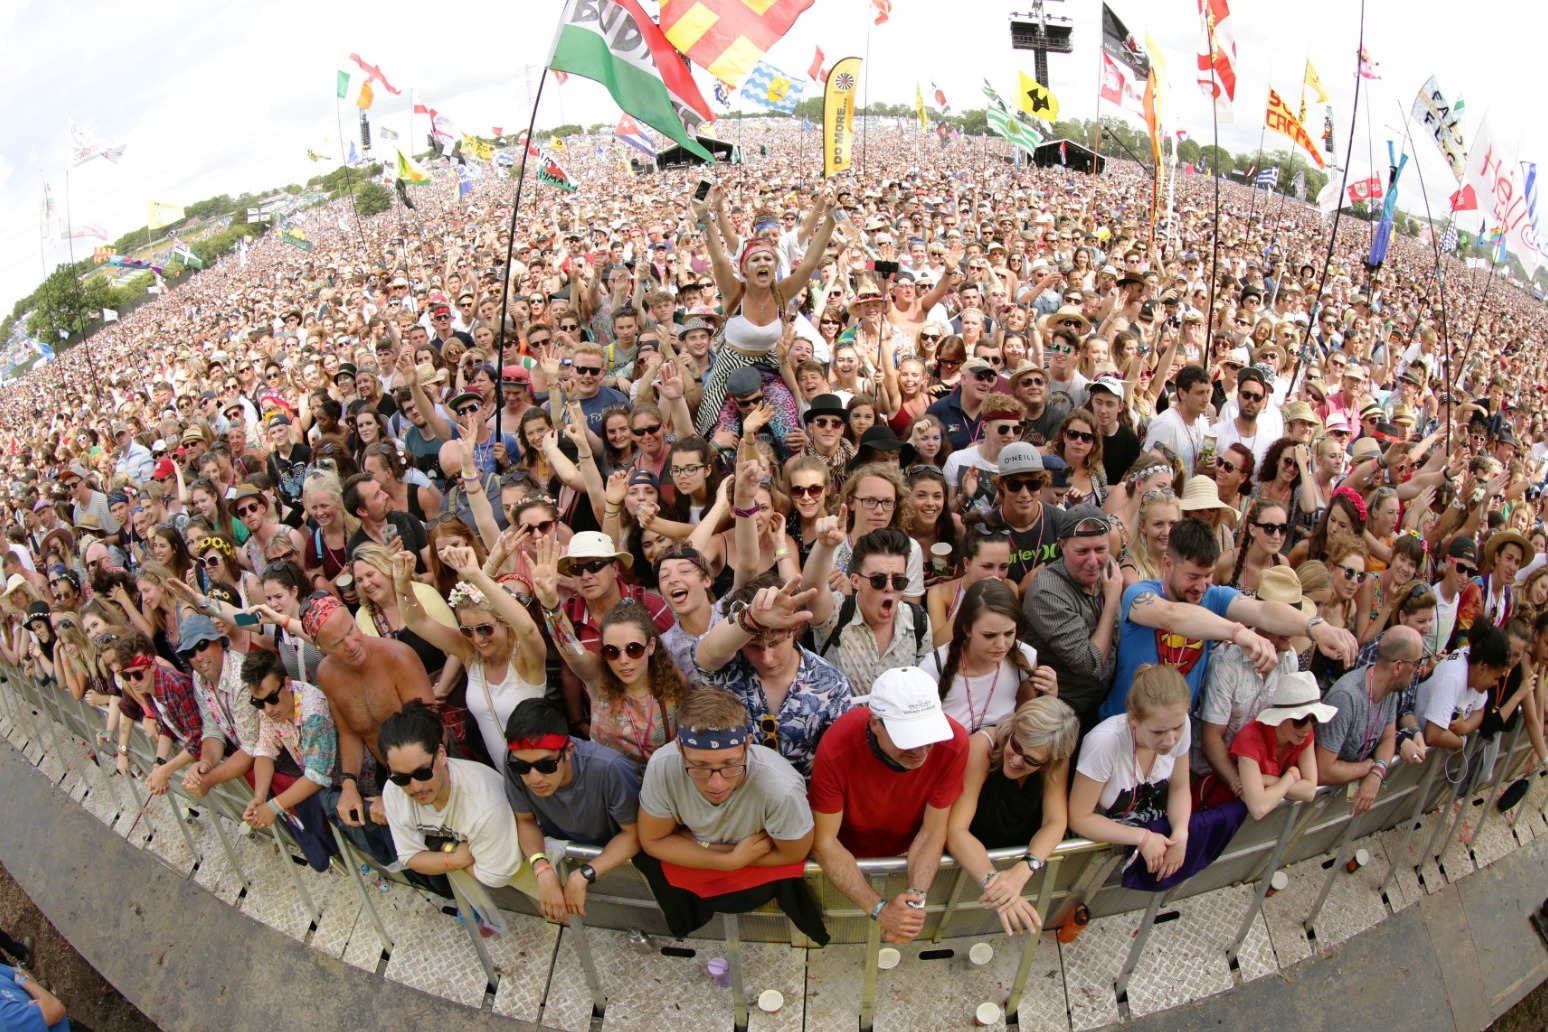 Festivals facing ‘lost summer’ over lack of Government insurance scheme – report 